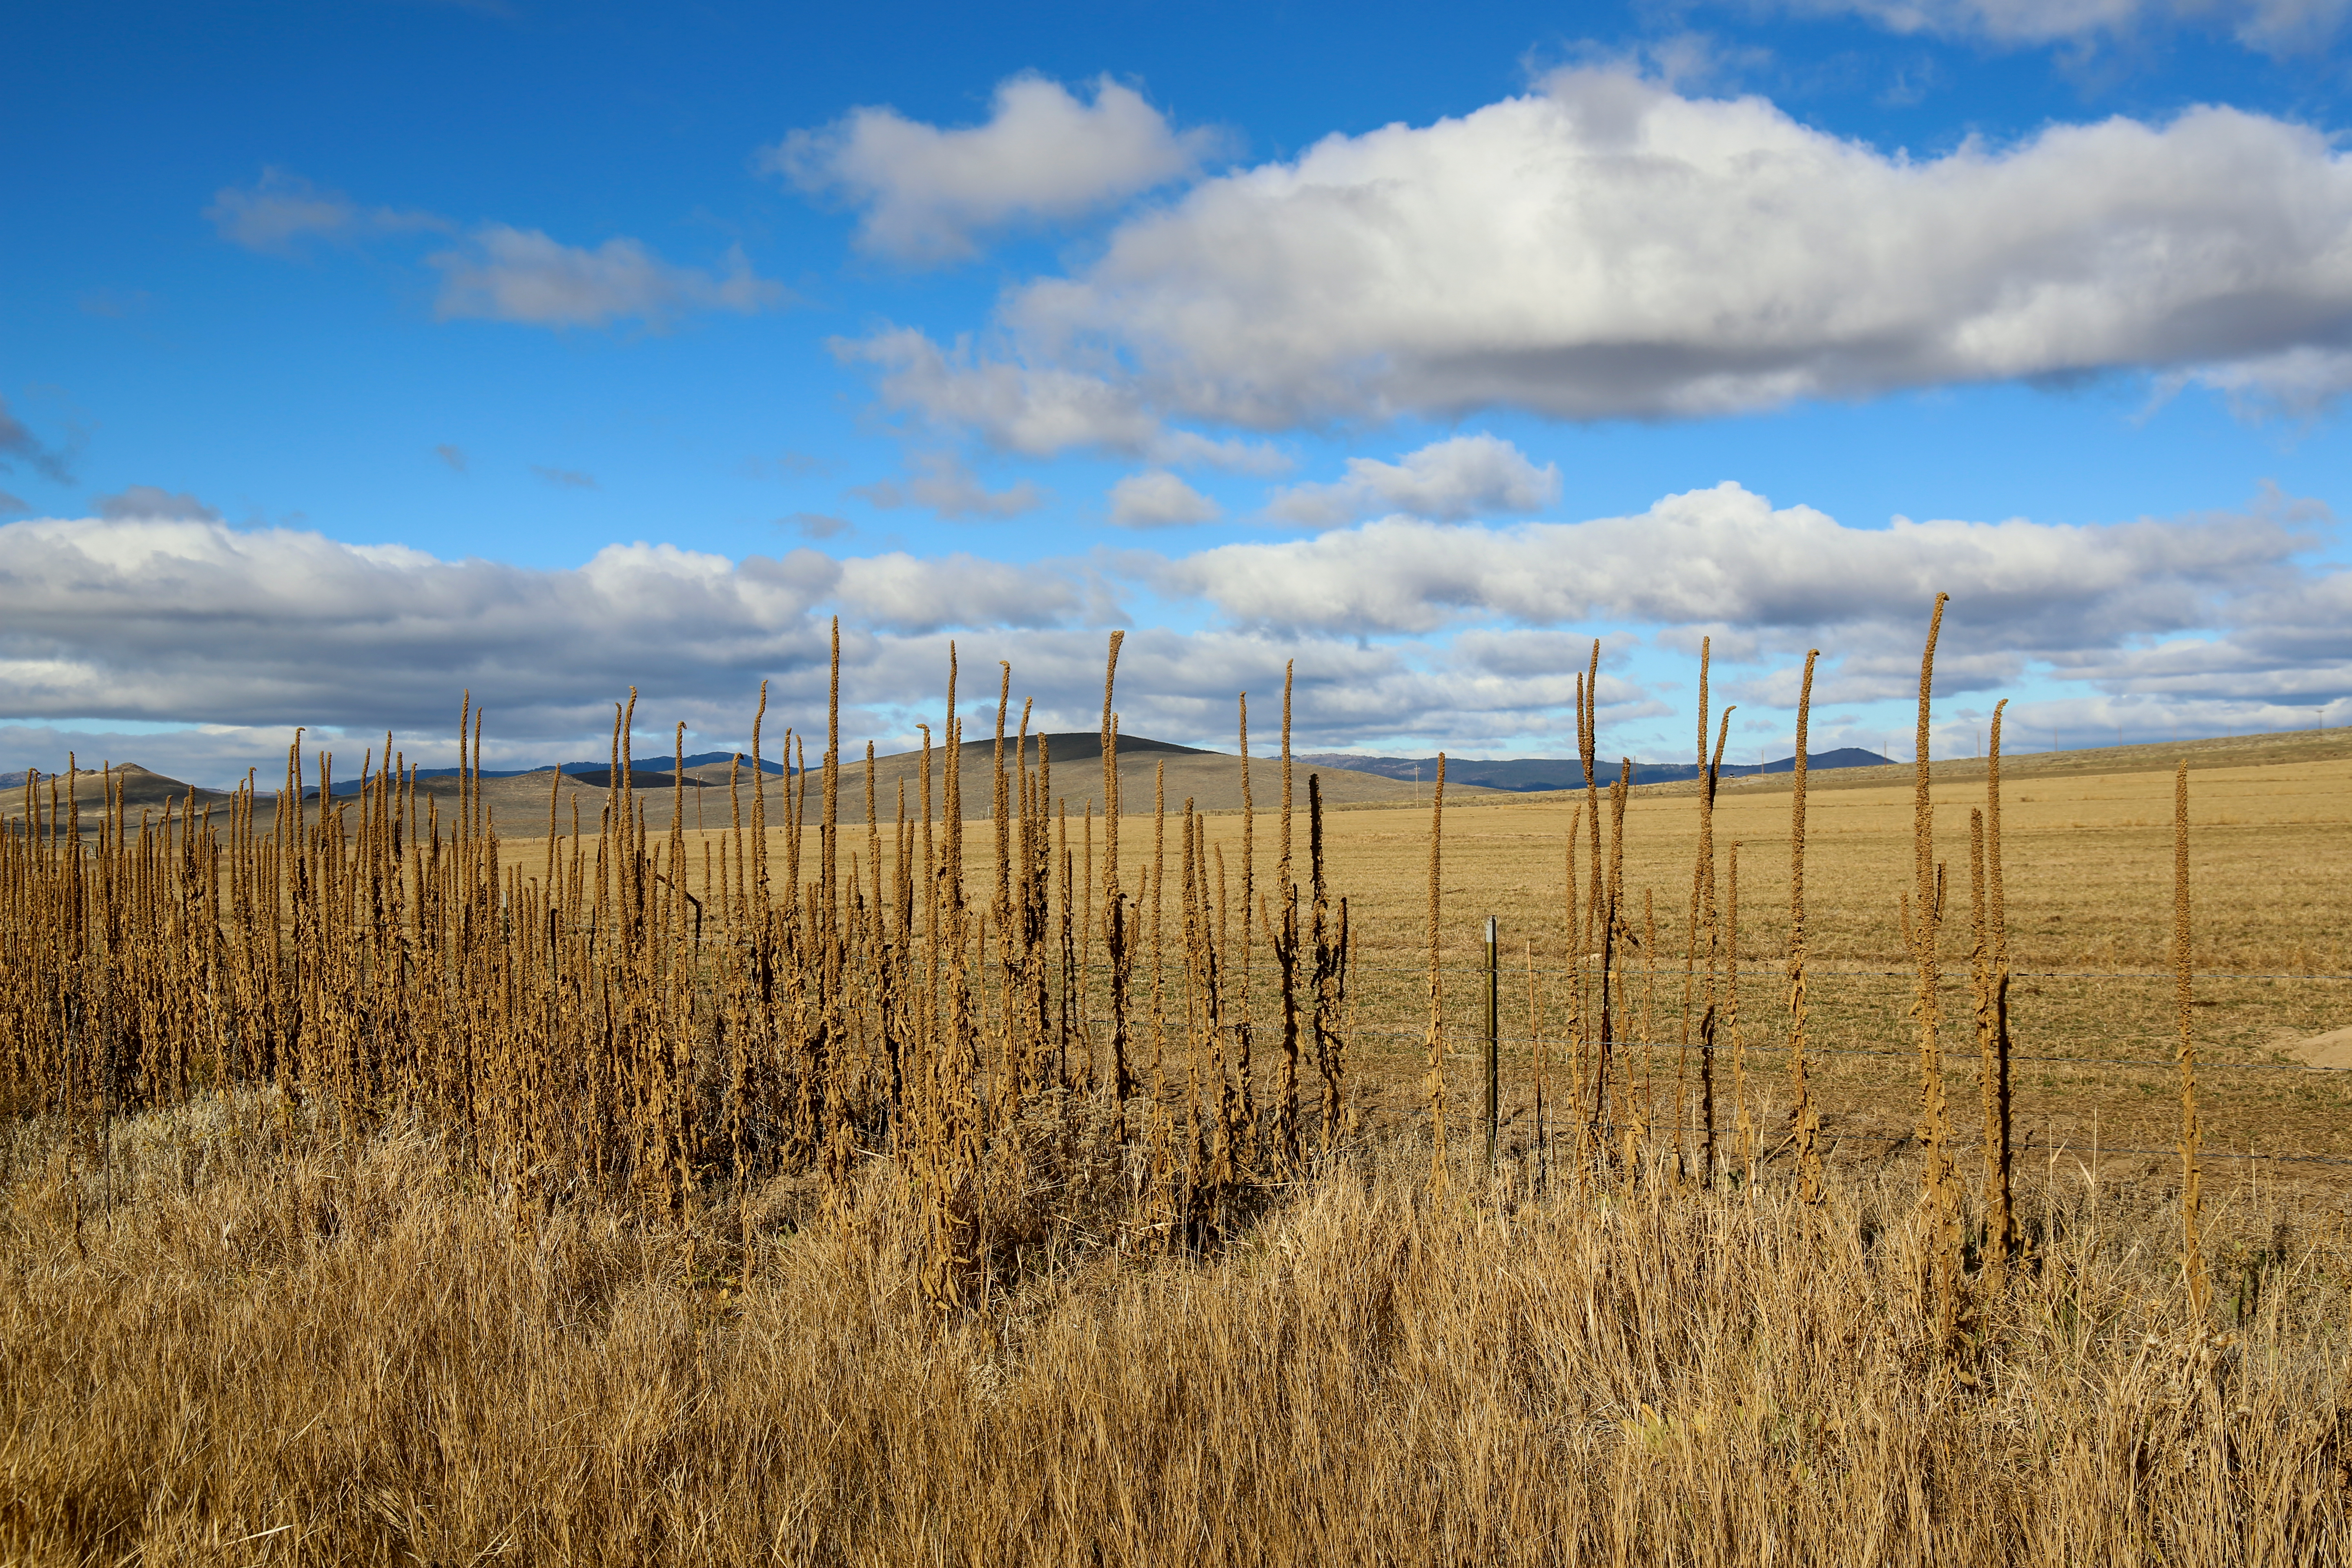 Mullein stalks ring the edge of an irrigated field owned by Green Alpha, LLC in Malheur County's Cow Valley.